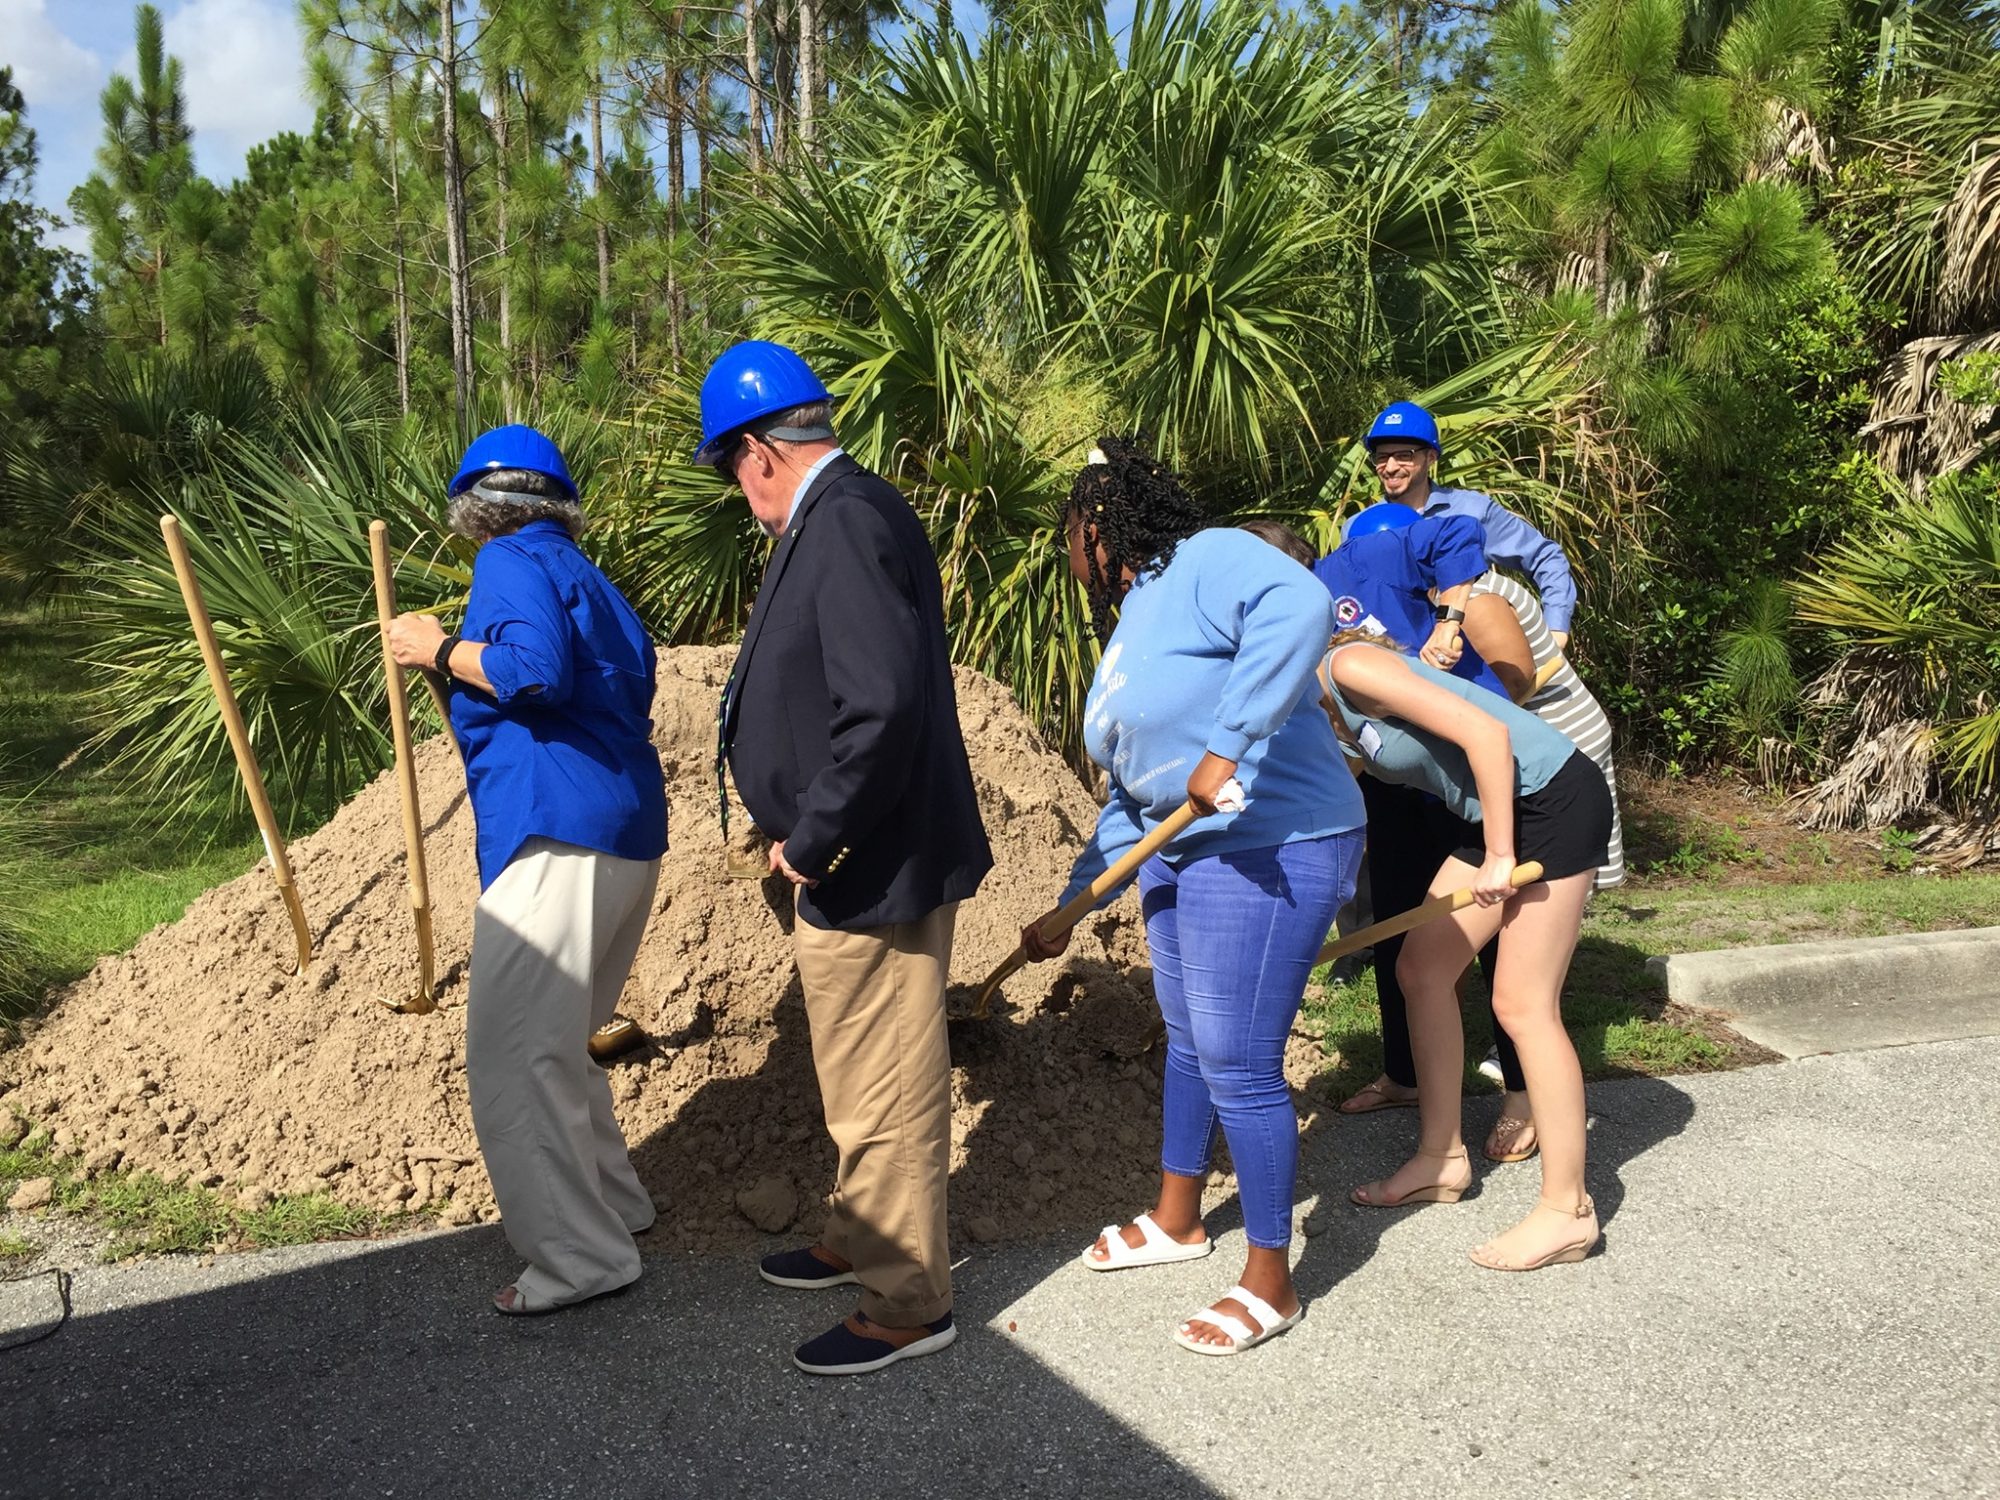 FGCU to Offer a Second Pilot House for Student Housing Christel